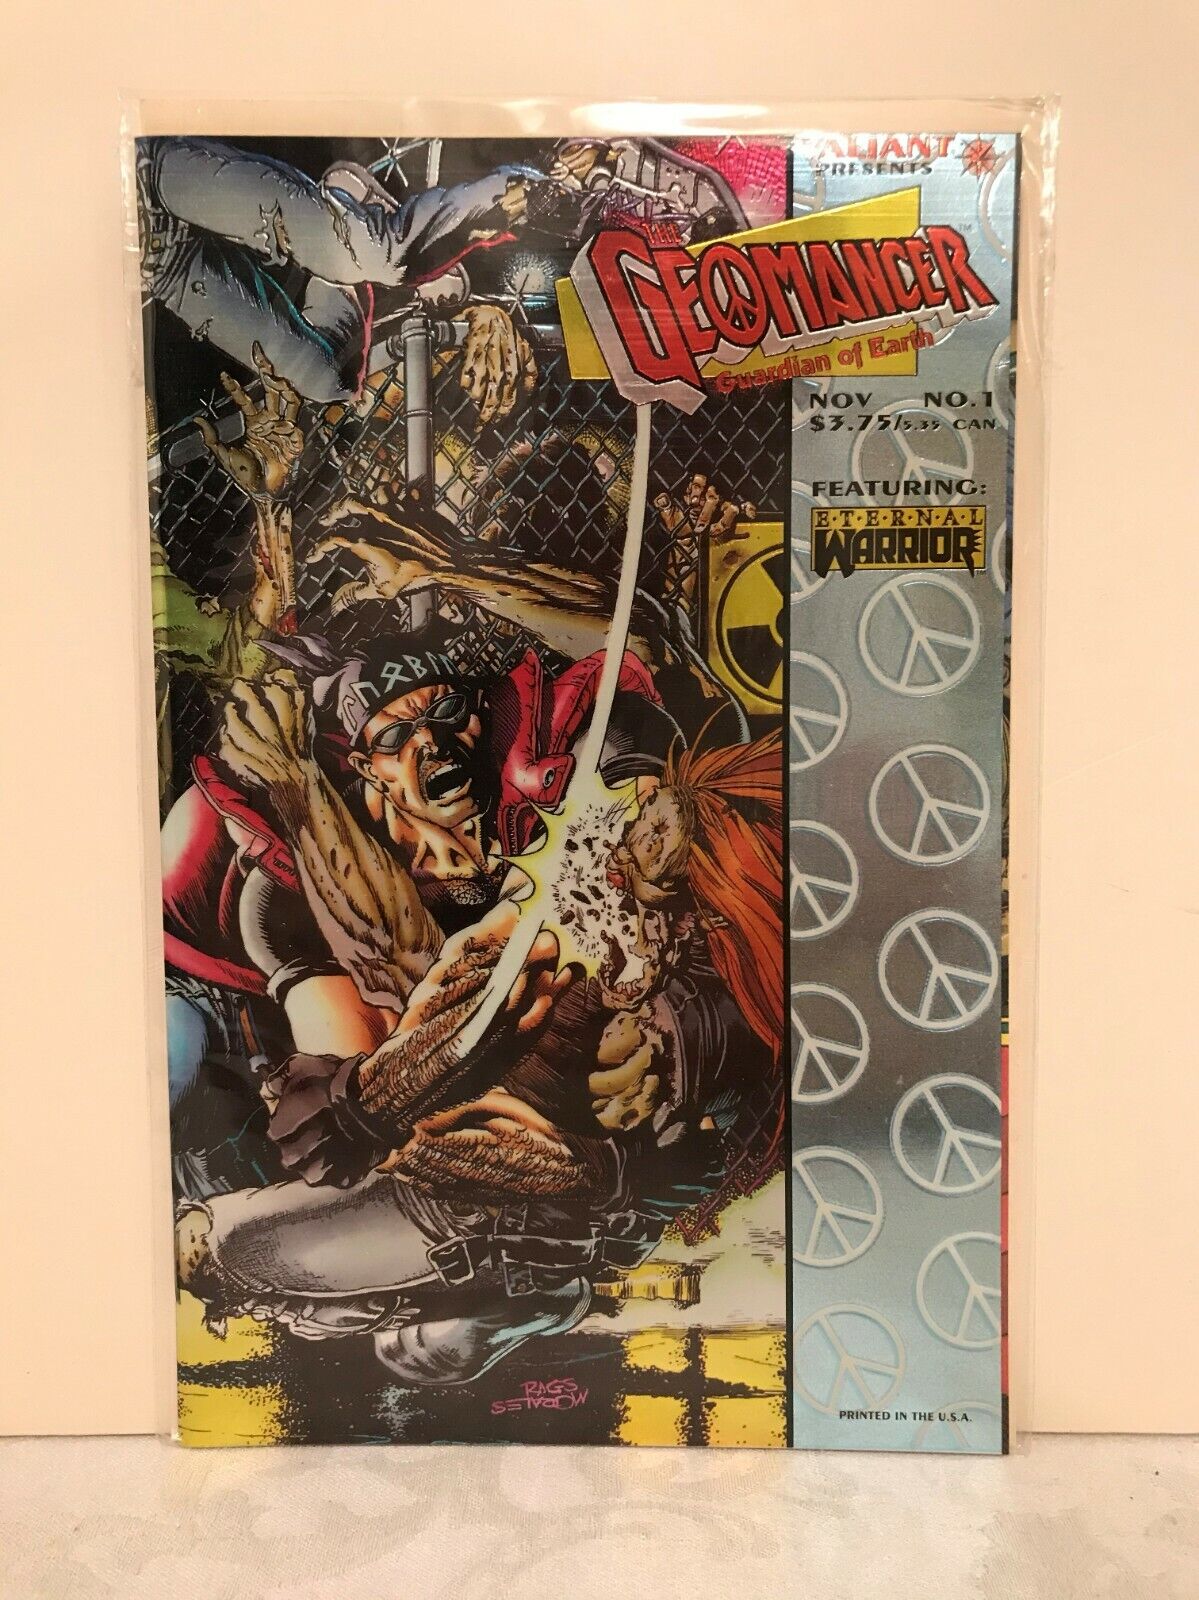 Geomancer #1 - 1994 - Valiant - etched chrome cover